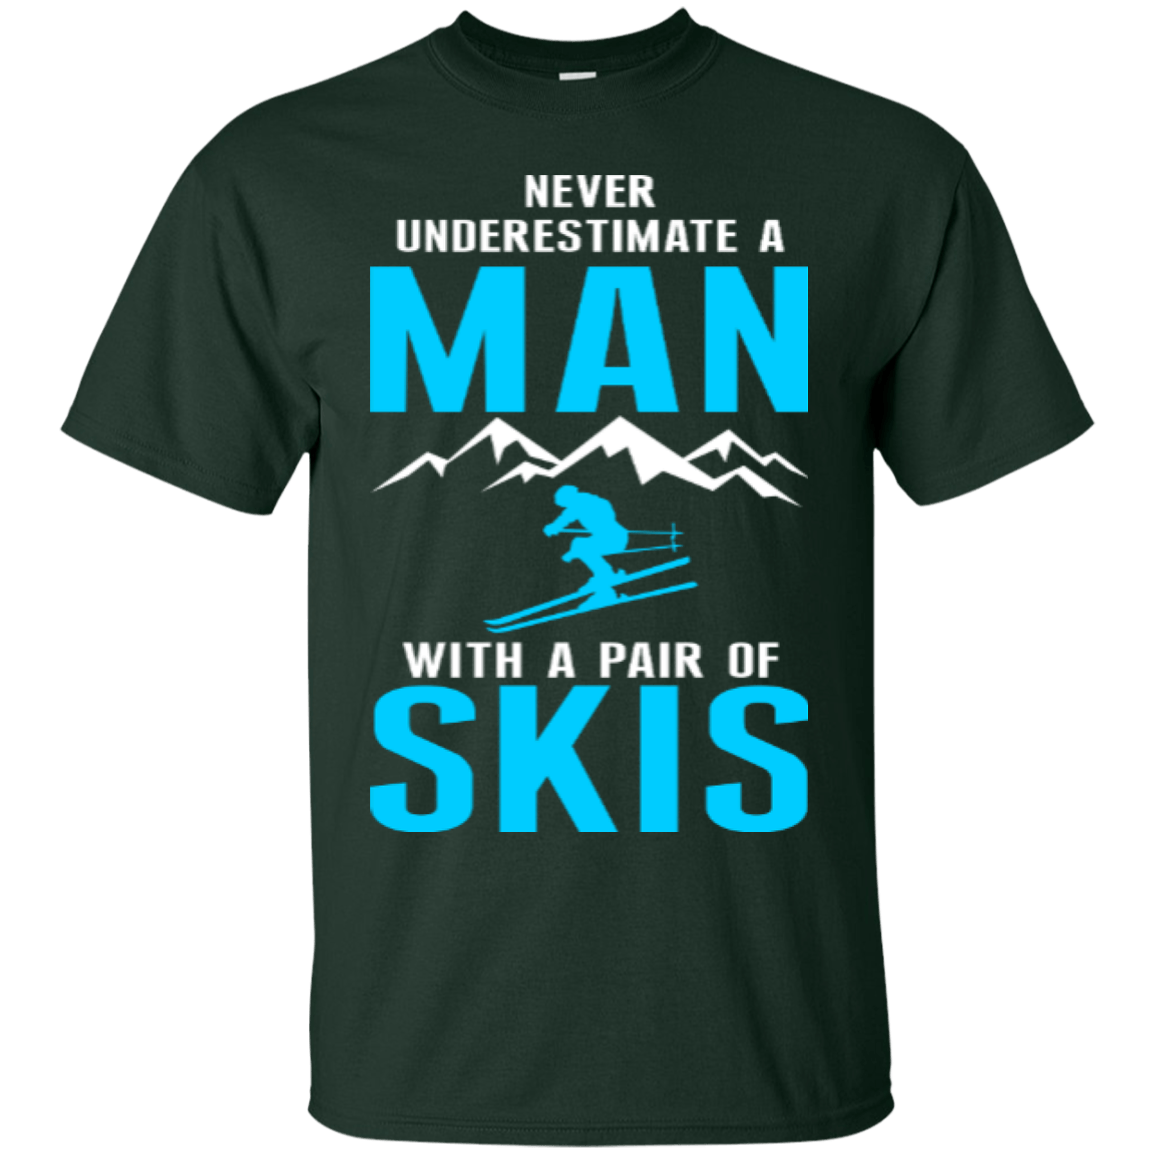 Never Underestimate A Man With A Pair Of Skis Tees - Powderaddicts